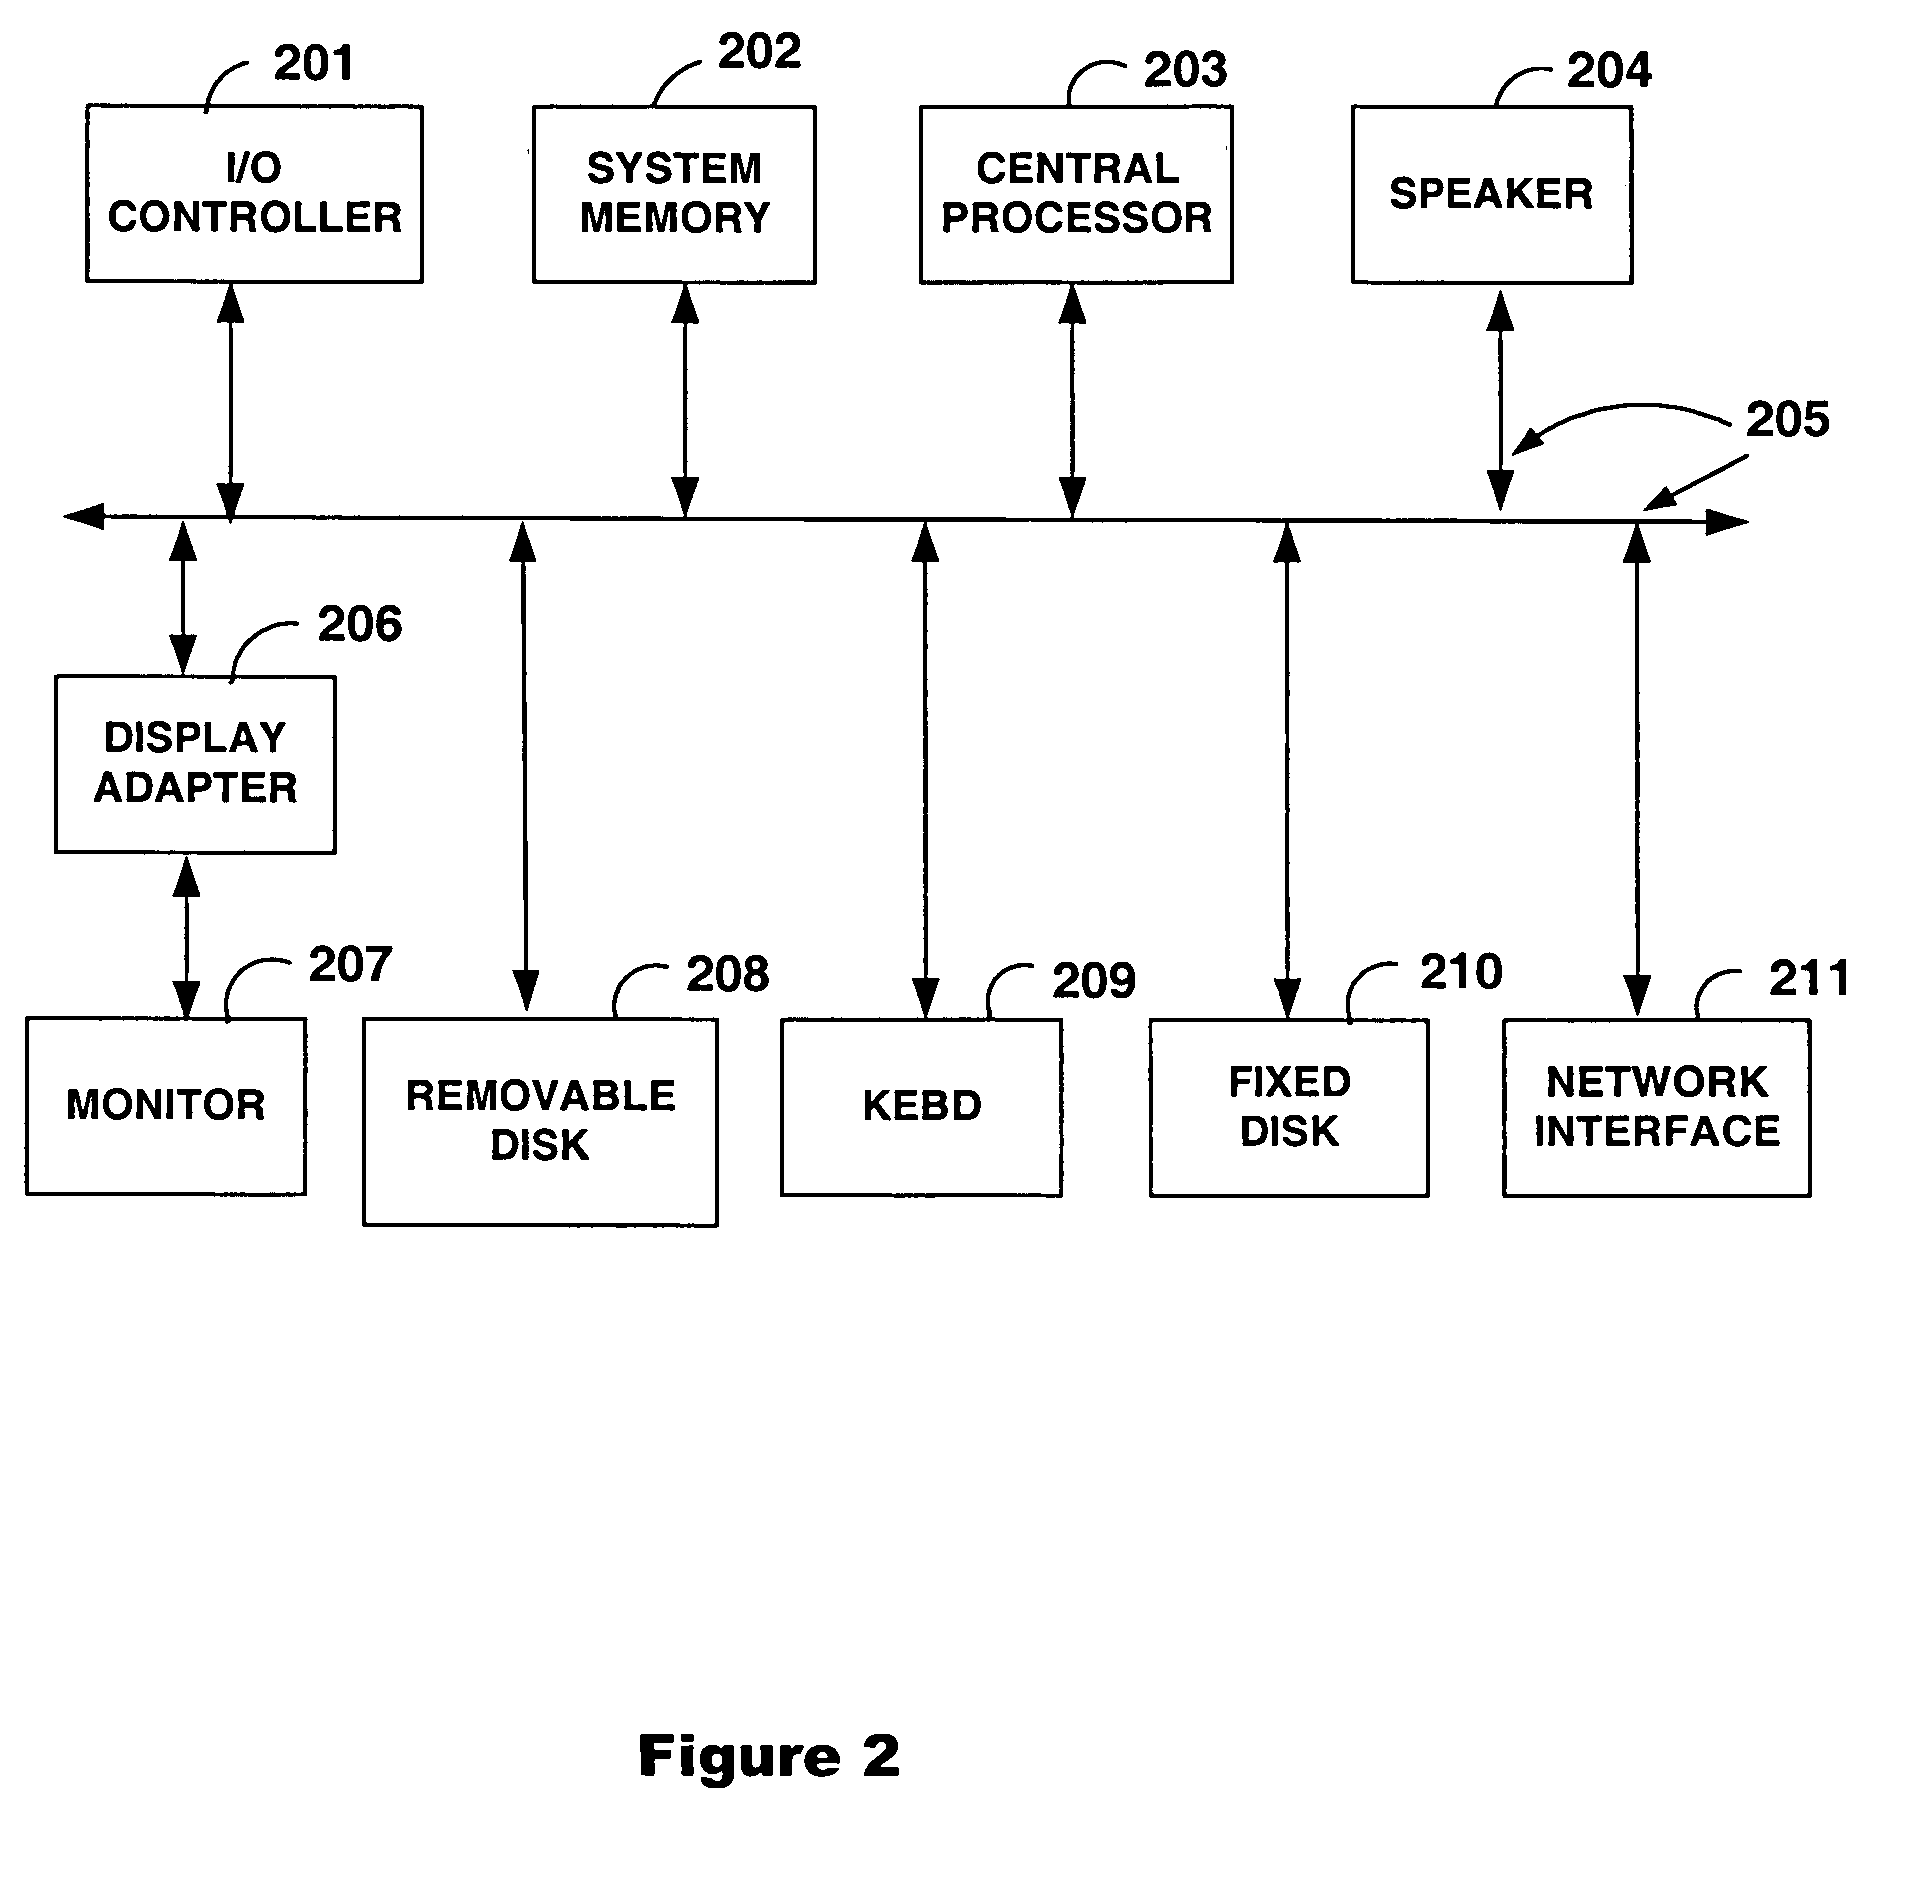 Methods for identifying DNA copy number changes